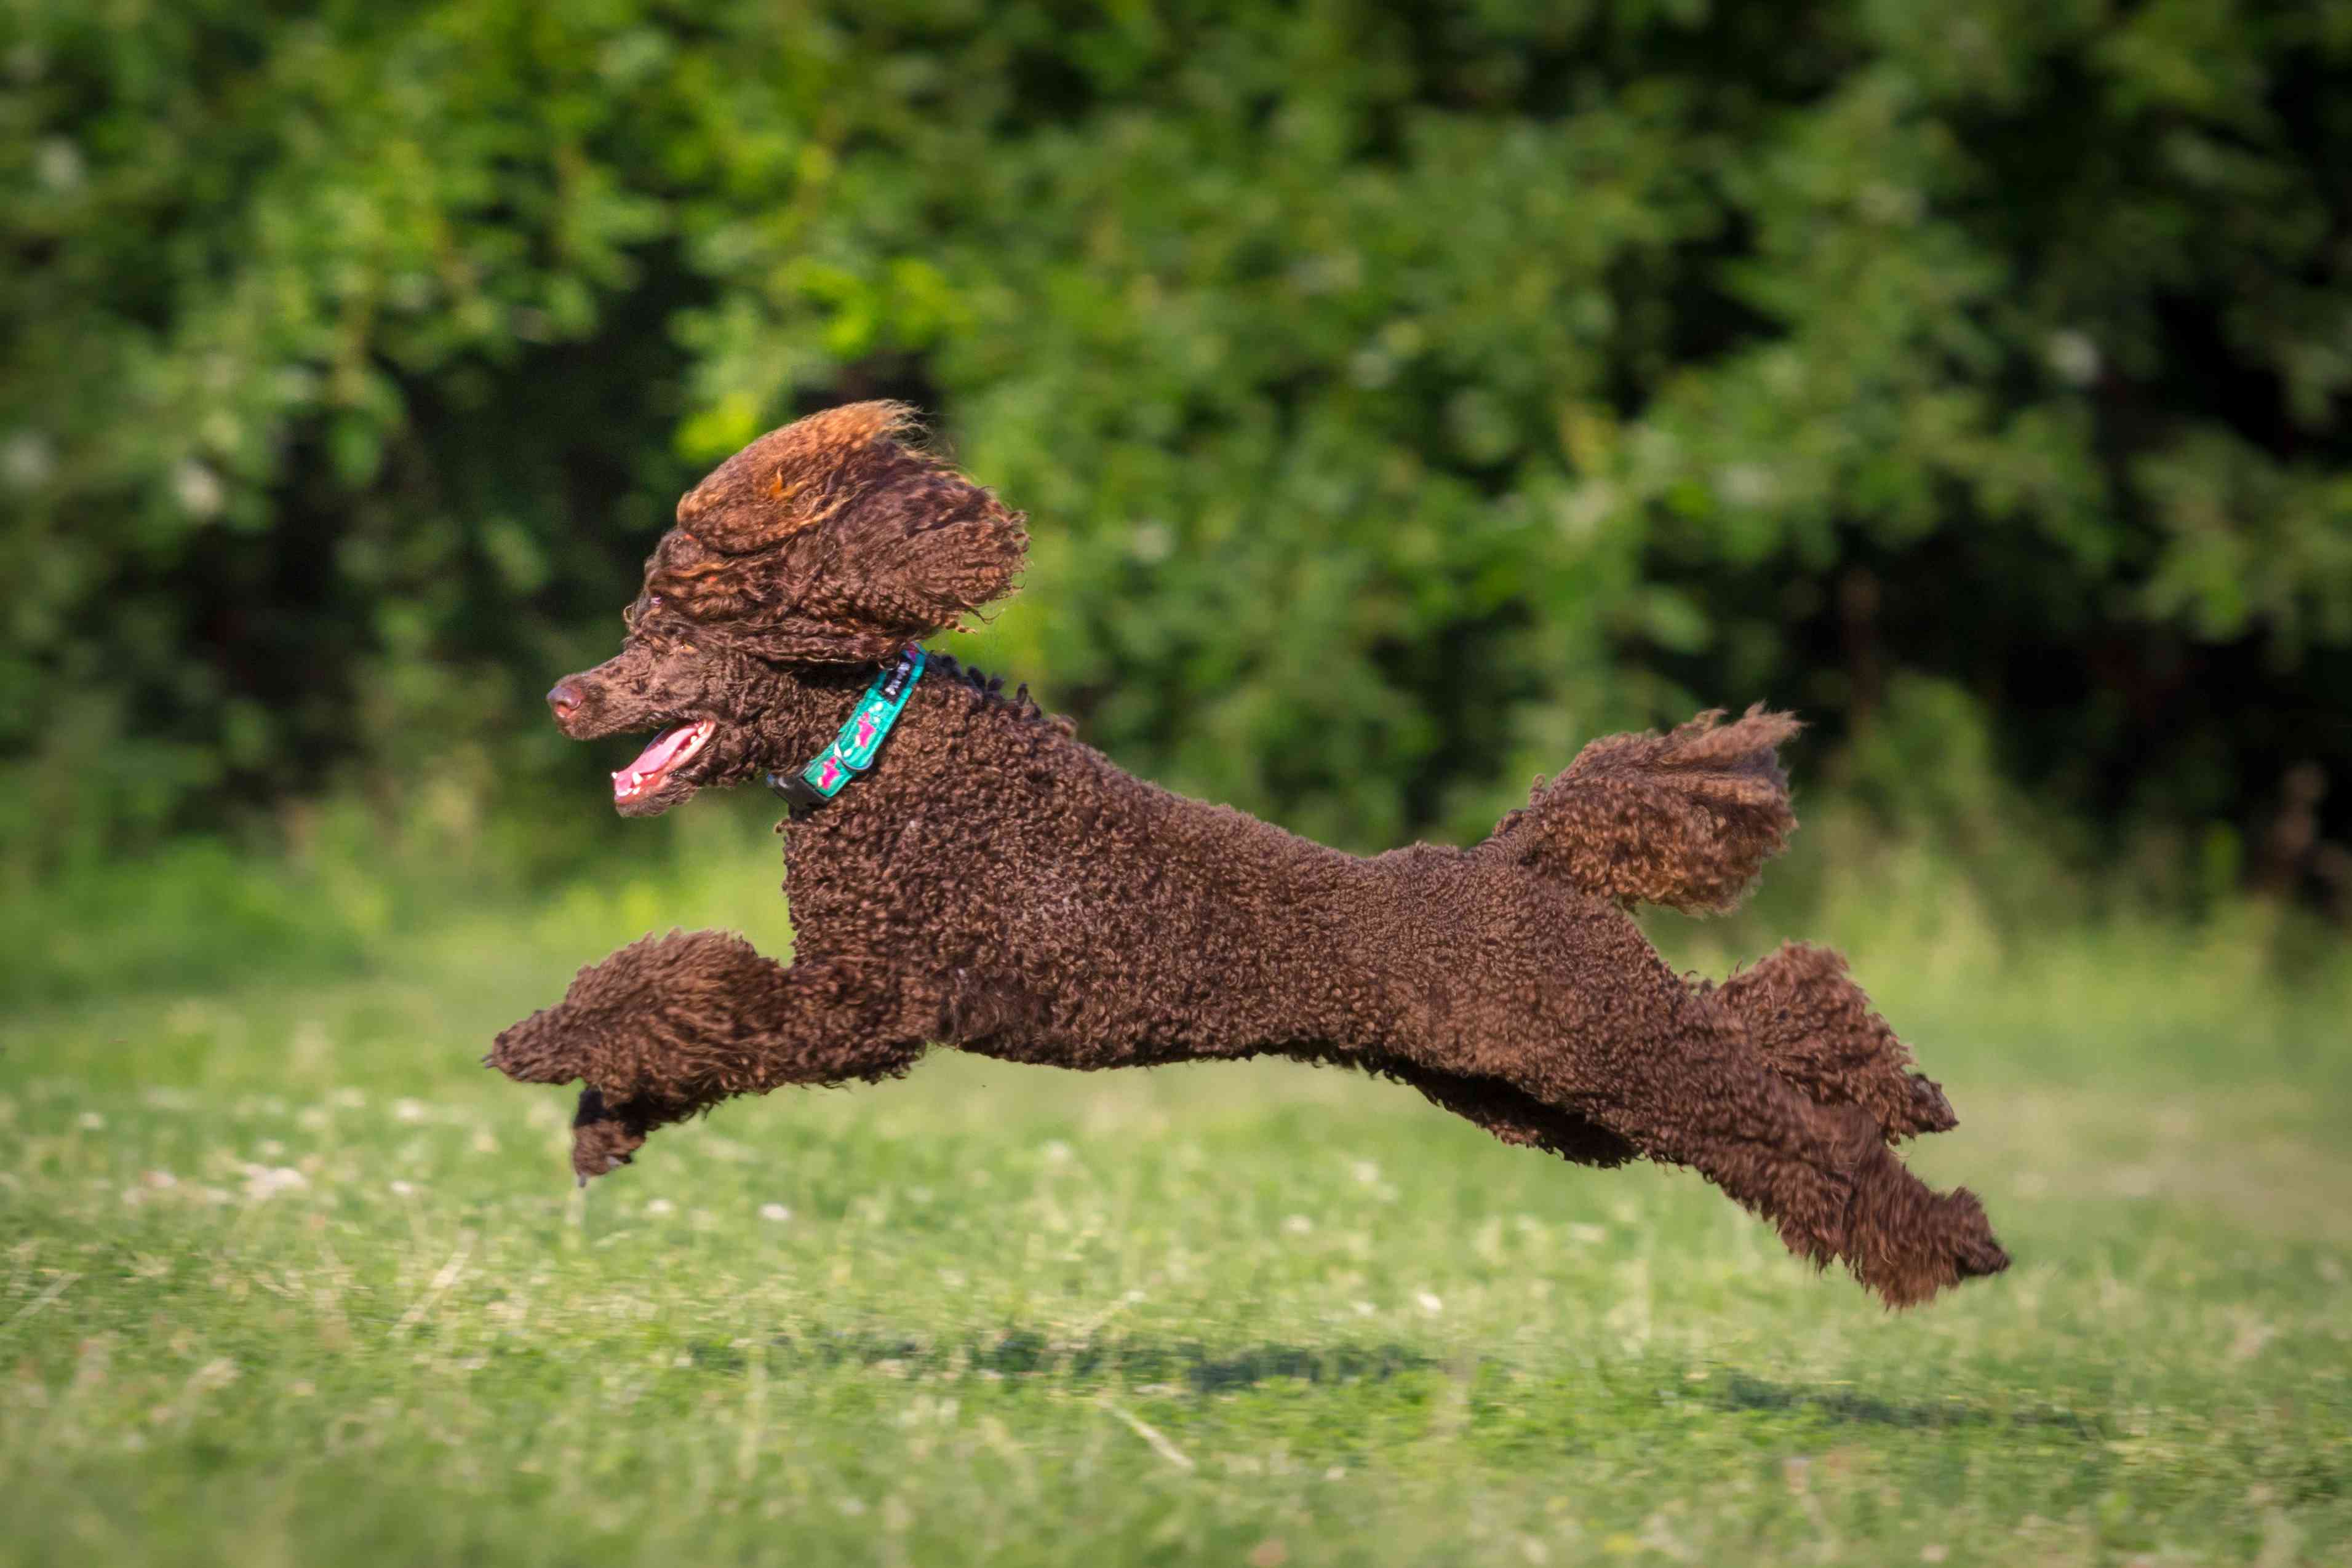 Brown Poodle running on grass